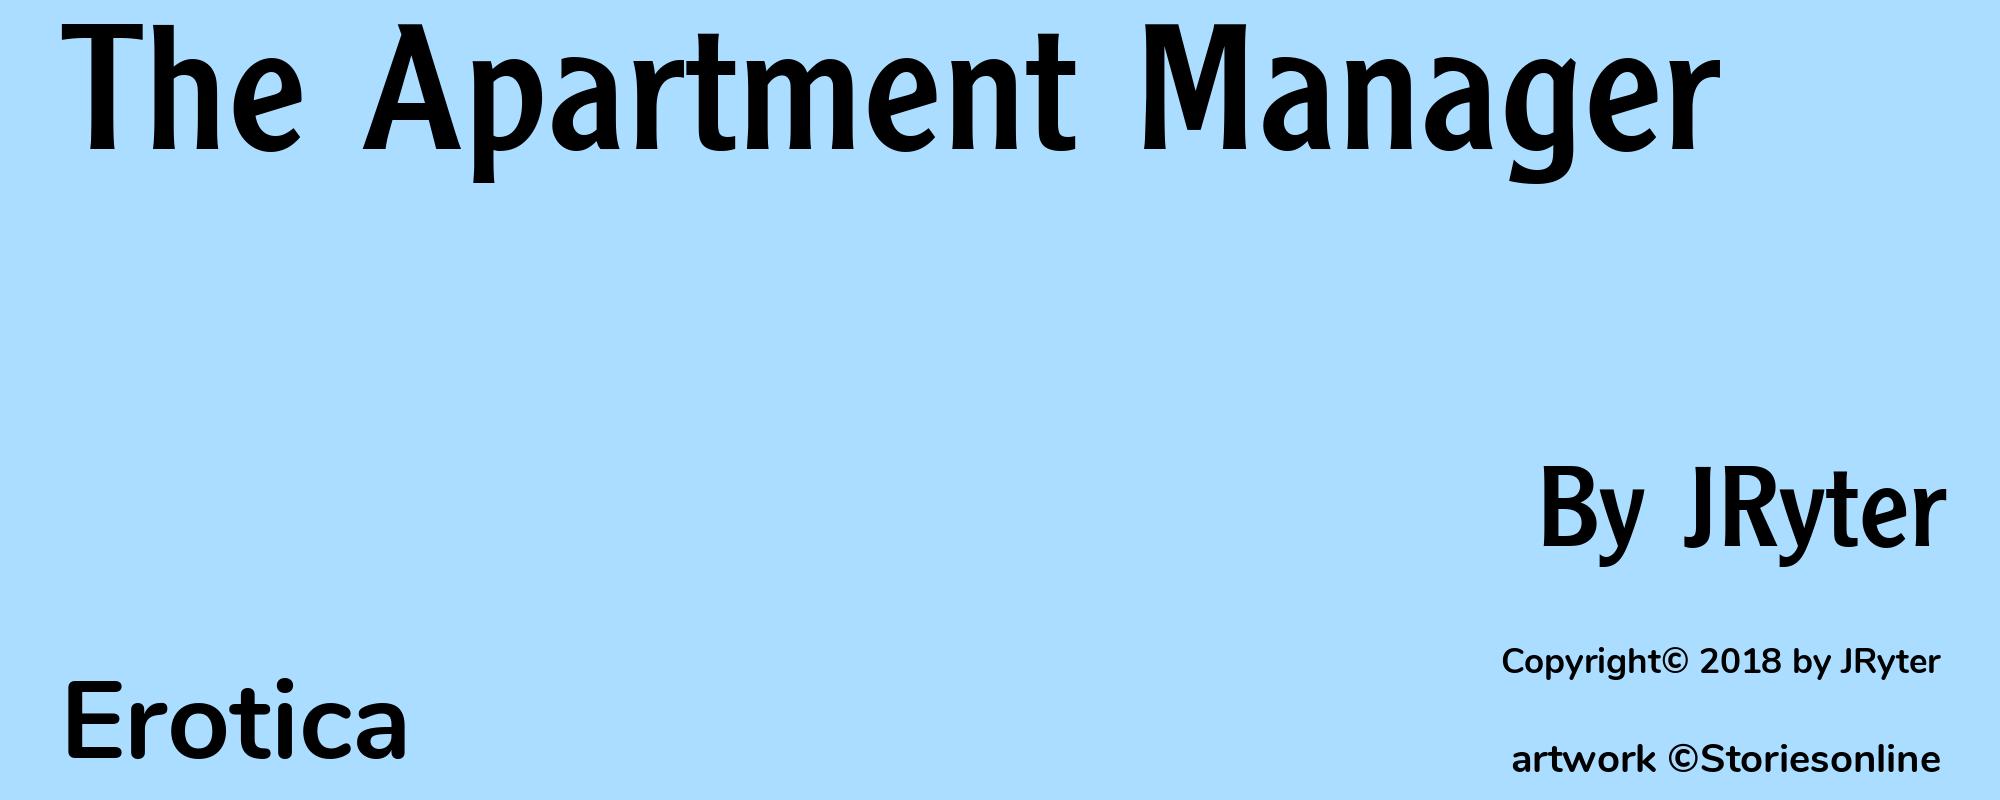 The Apartment Manager - Cover